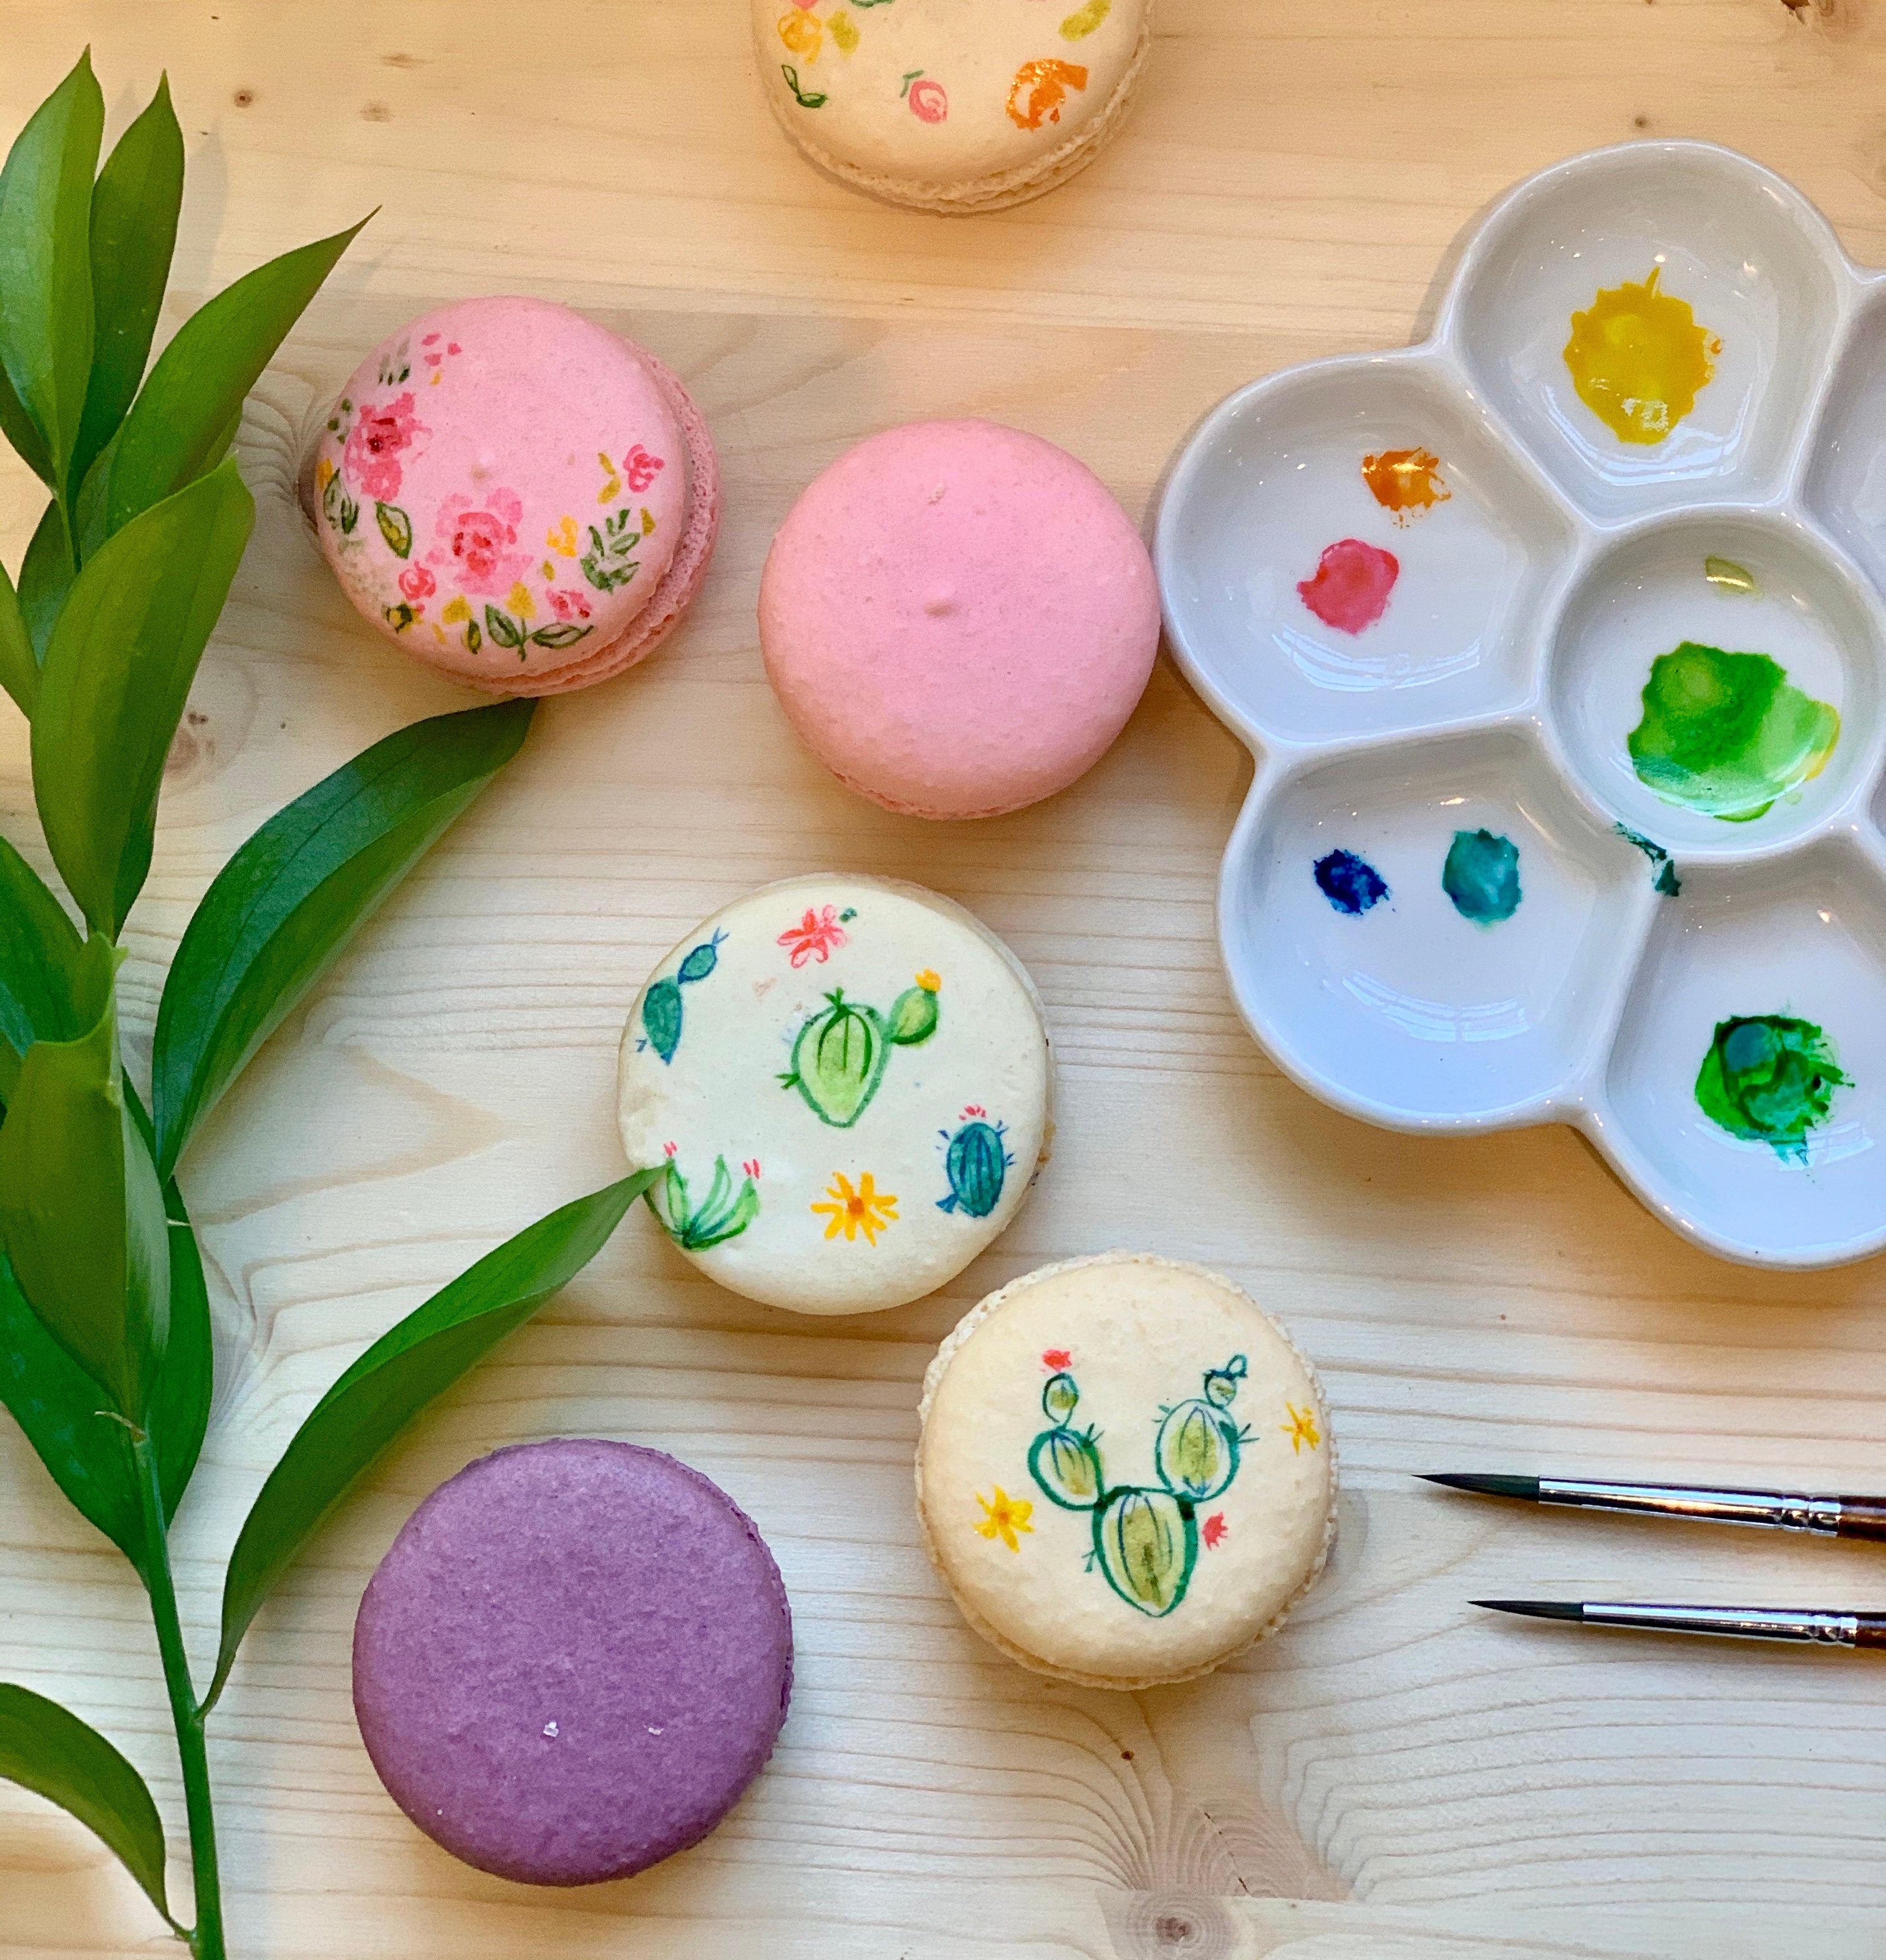 Learn to paint macarons